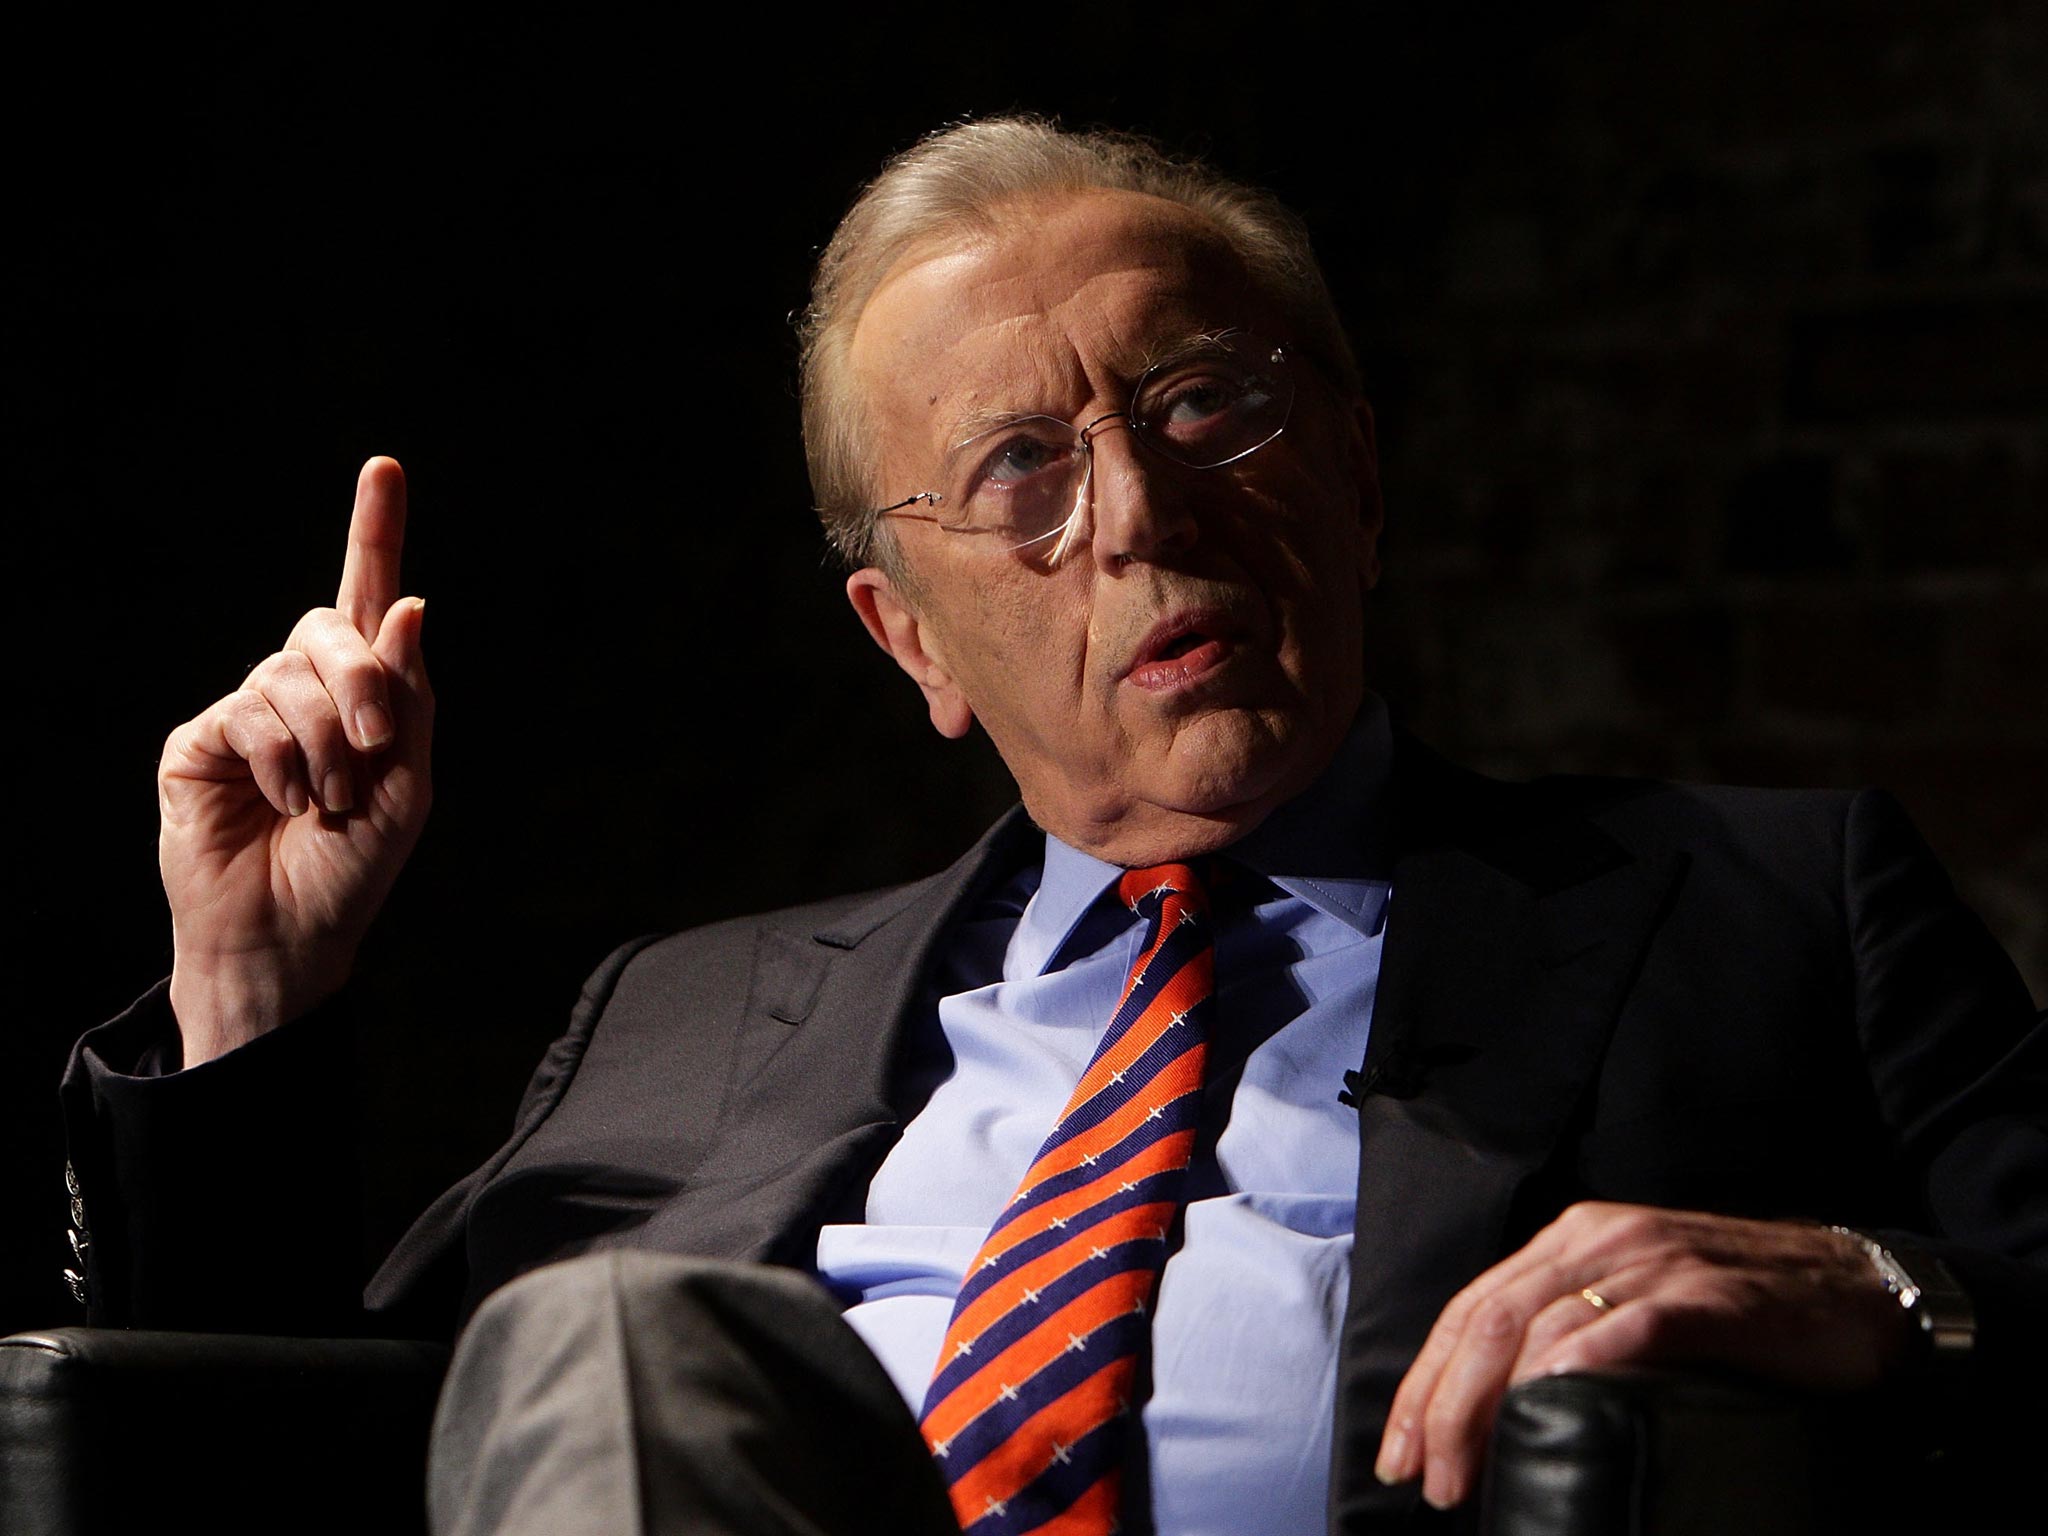 Broadcaster and journalist Sir David Frost